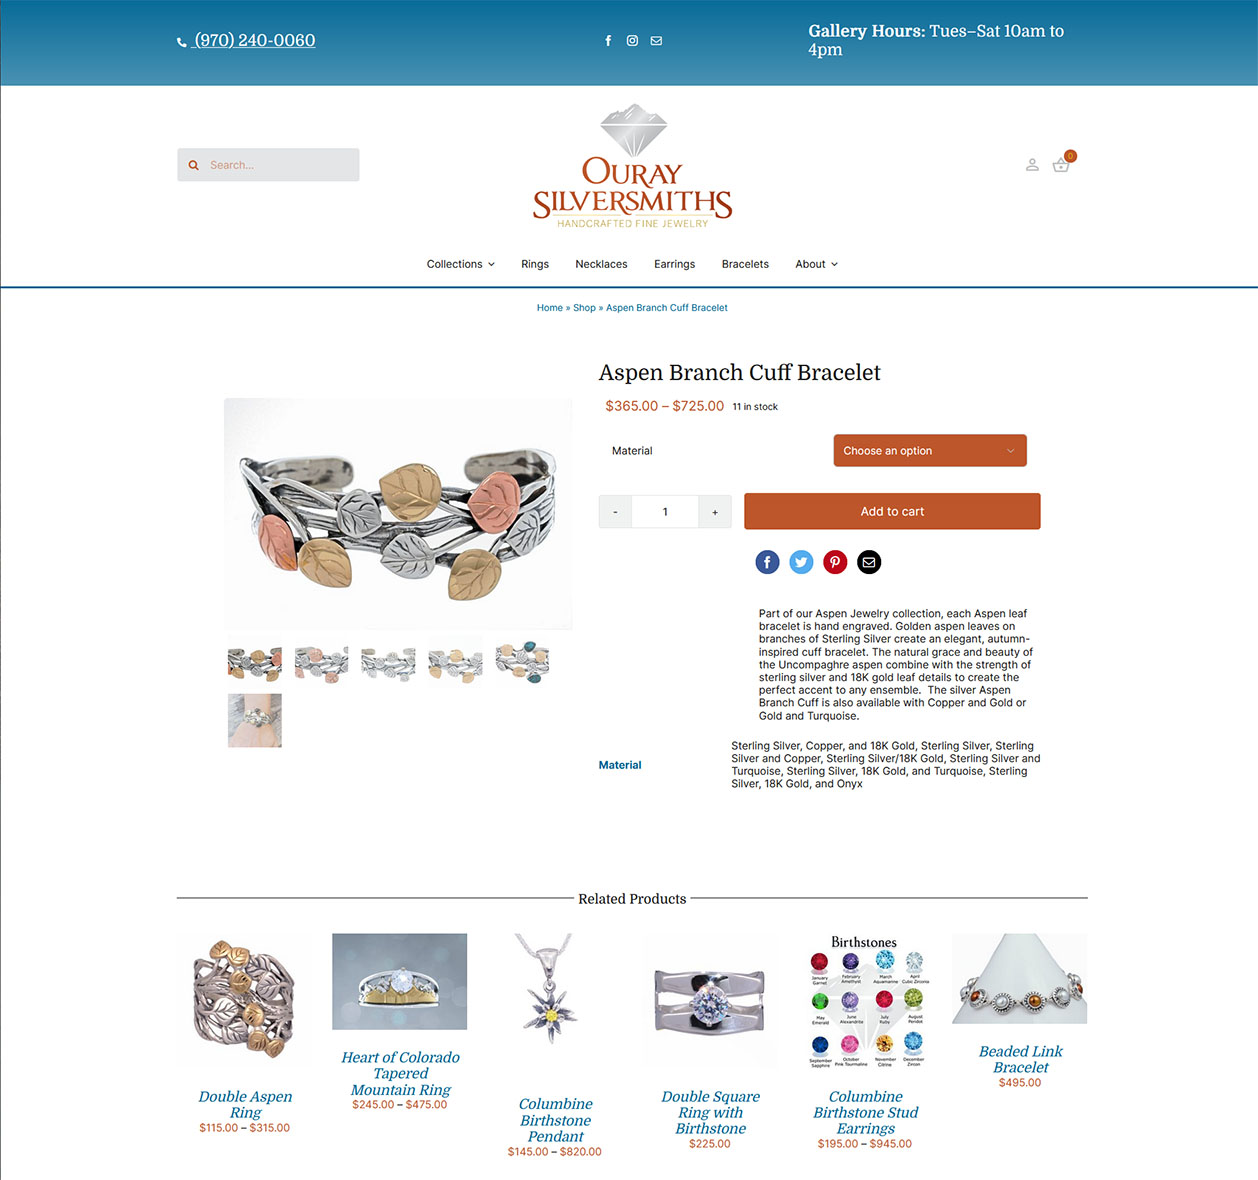 Product page after our redesign